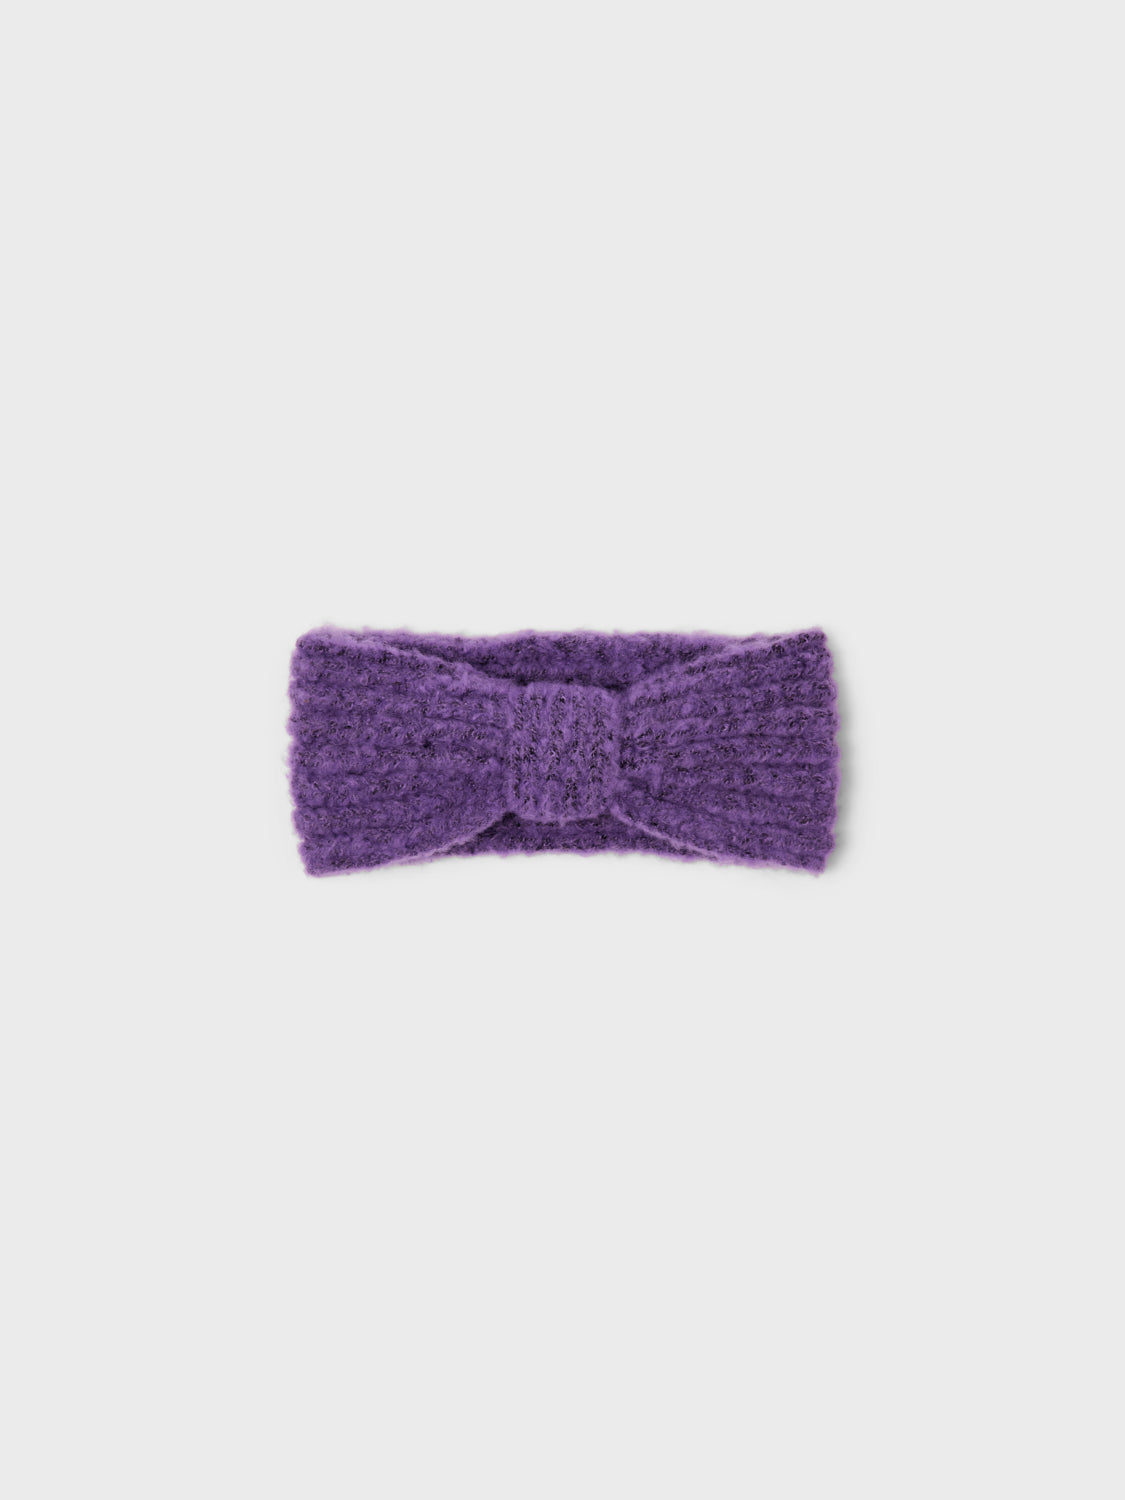 NKFMADIA Accessories - Amethyst Orchid